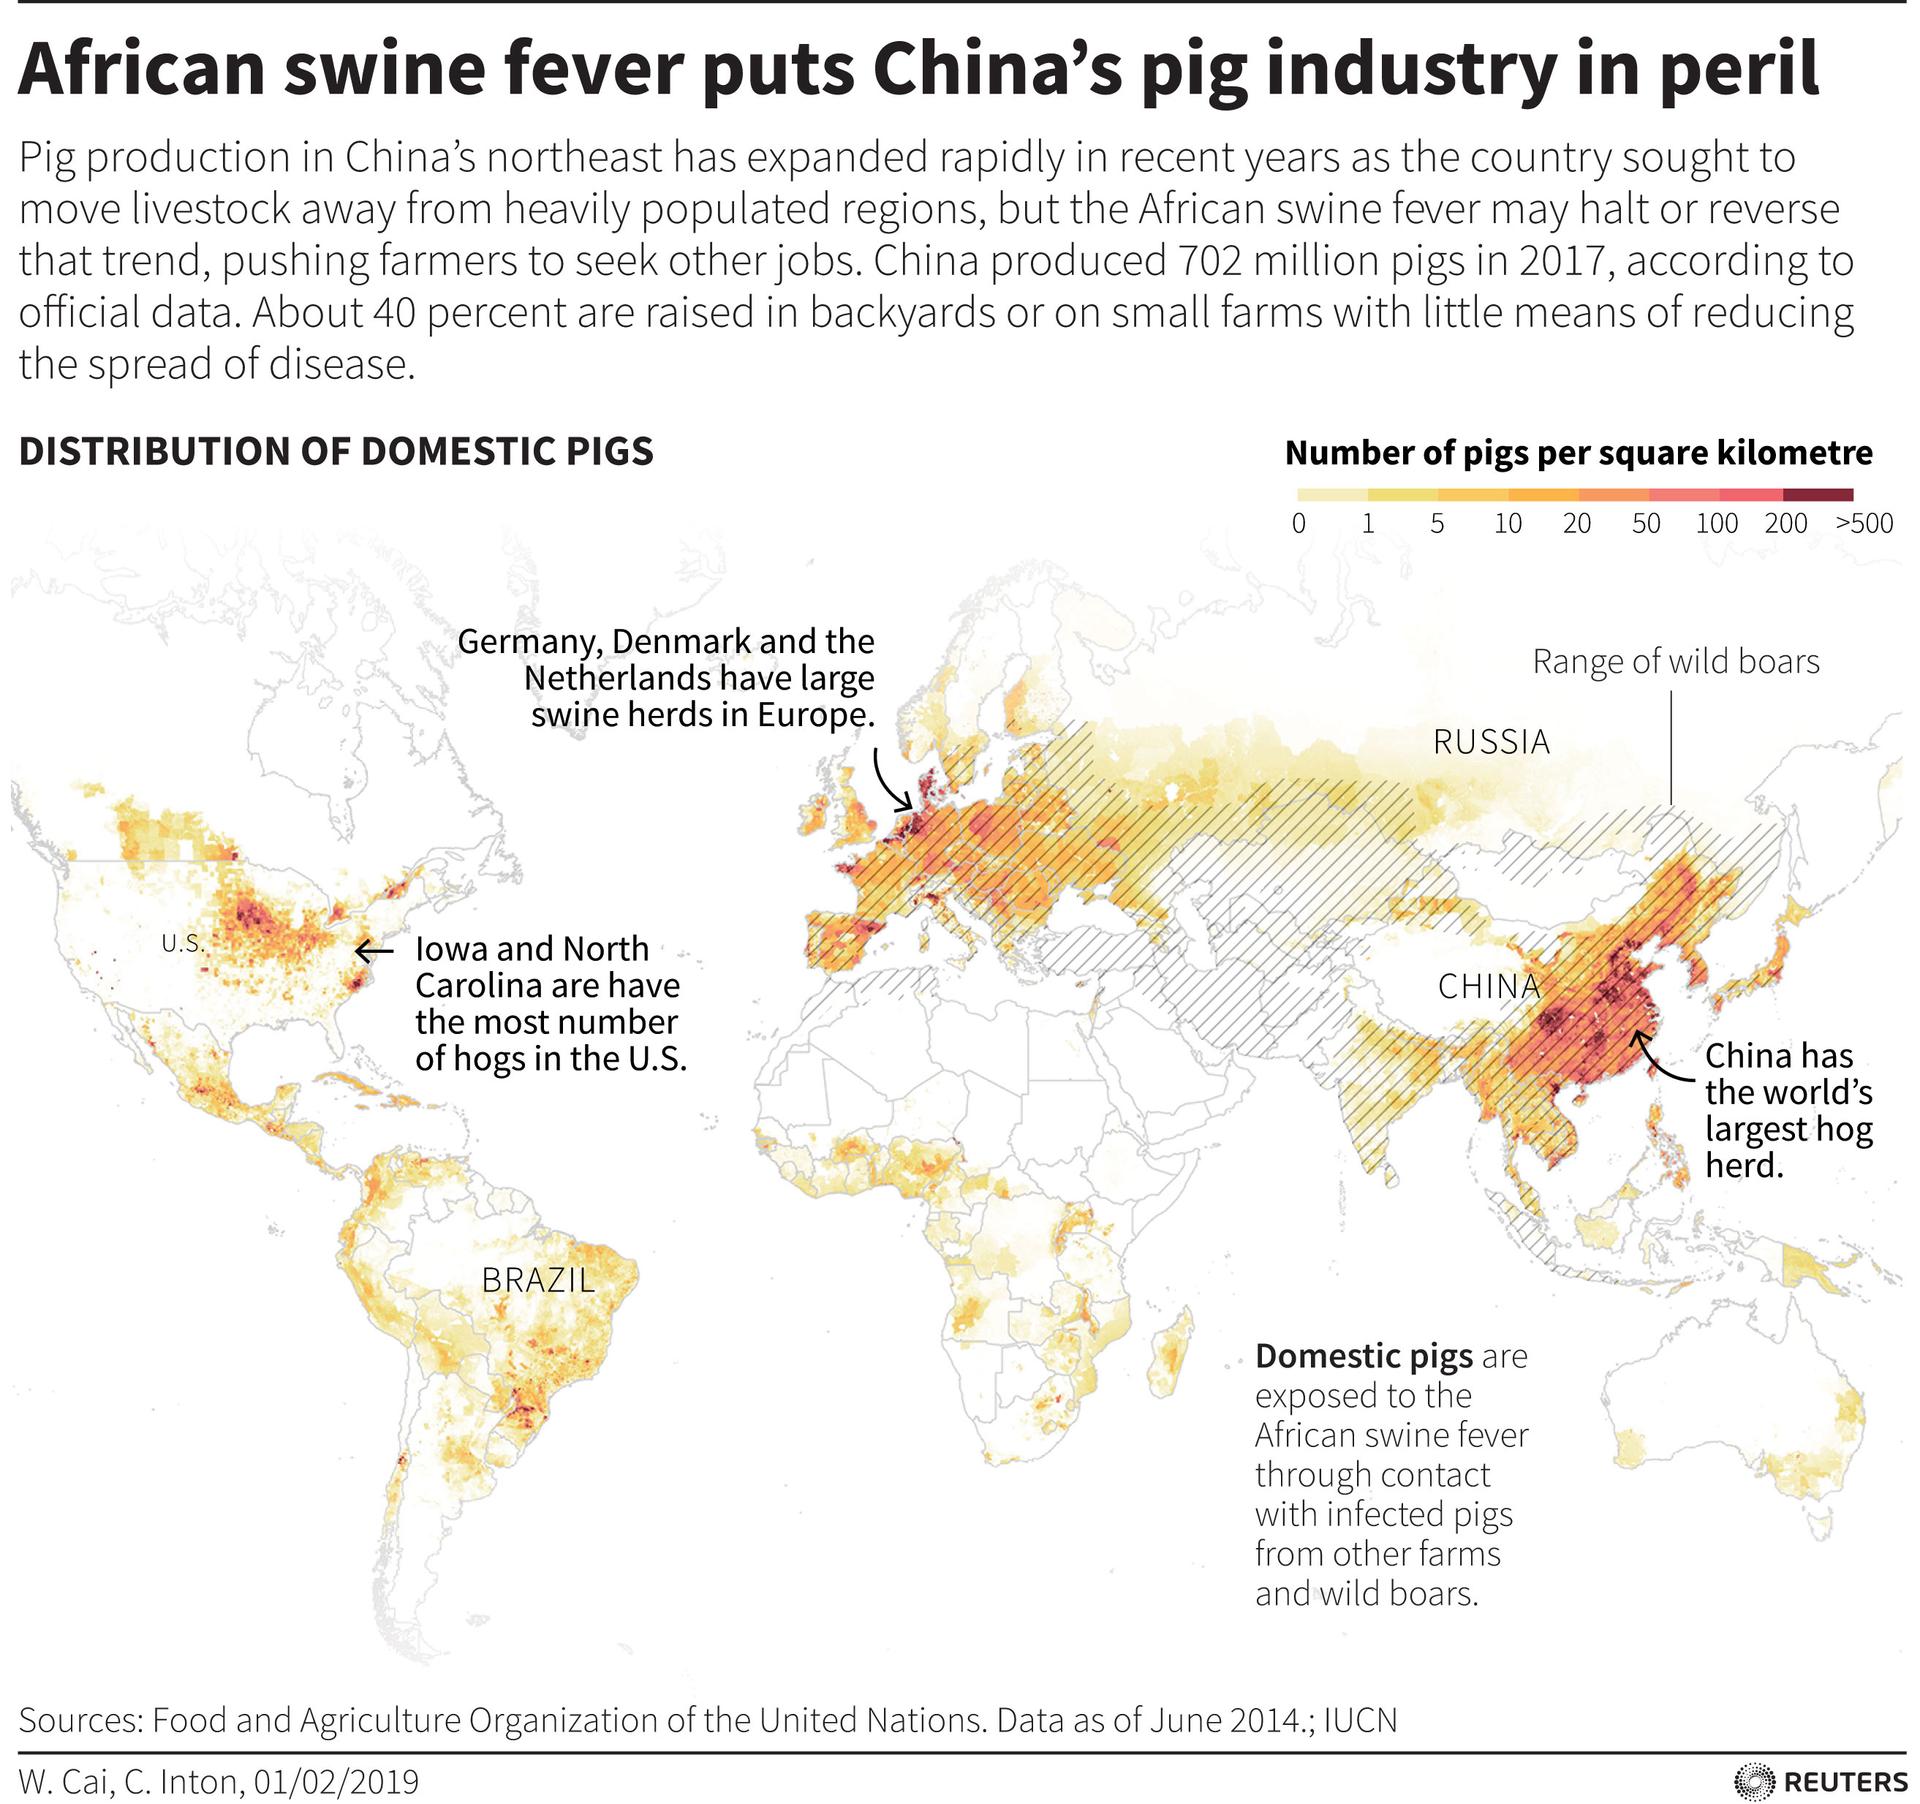 A map shows countries with large pig herds